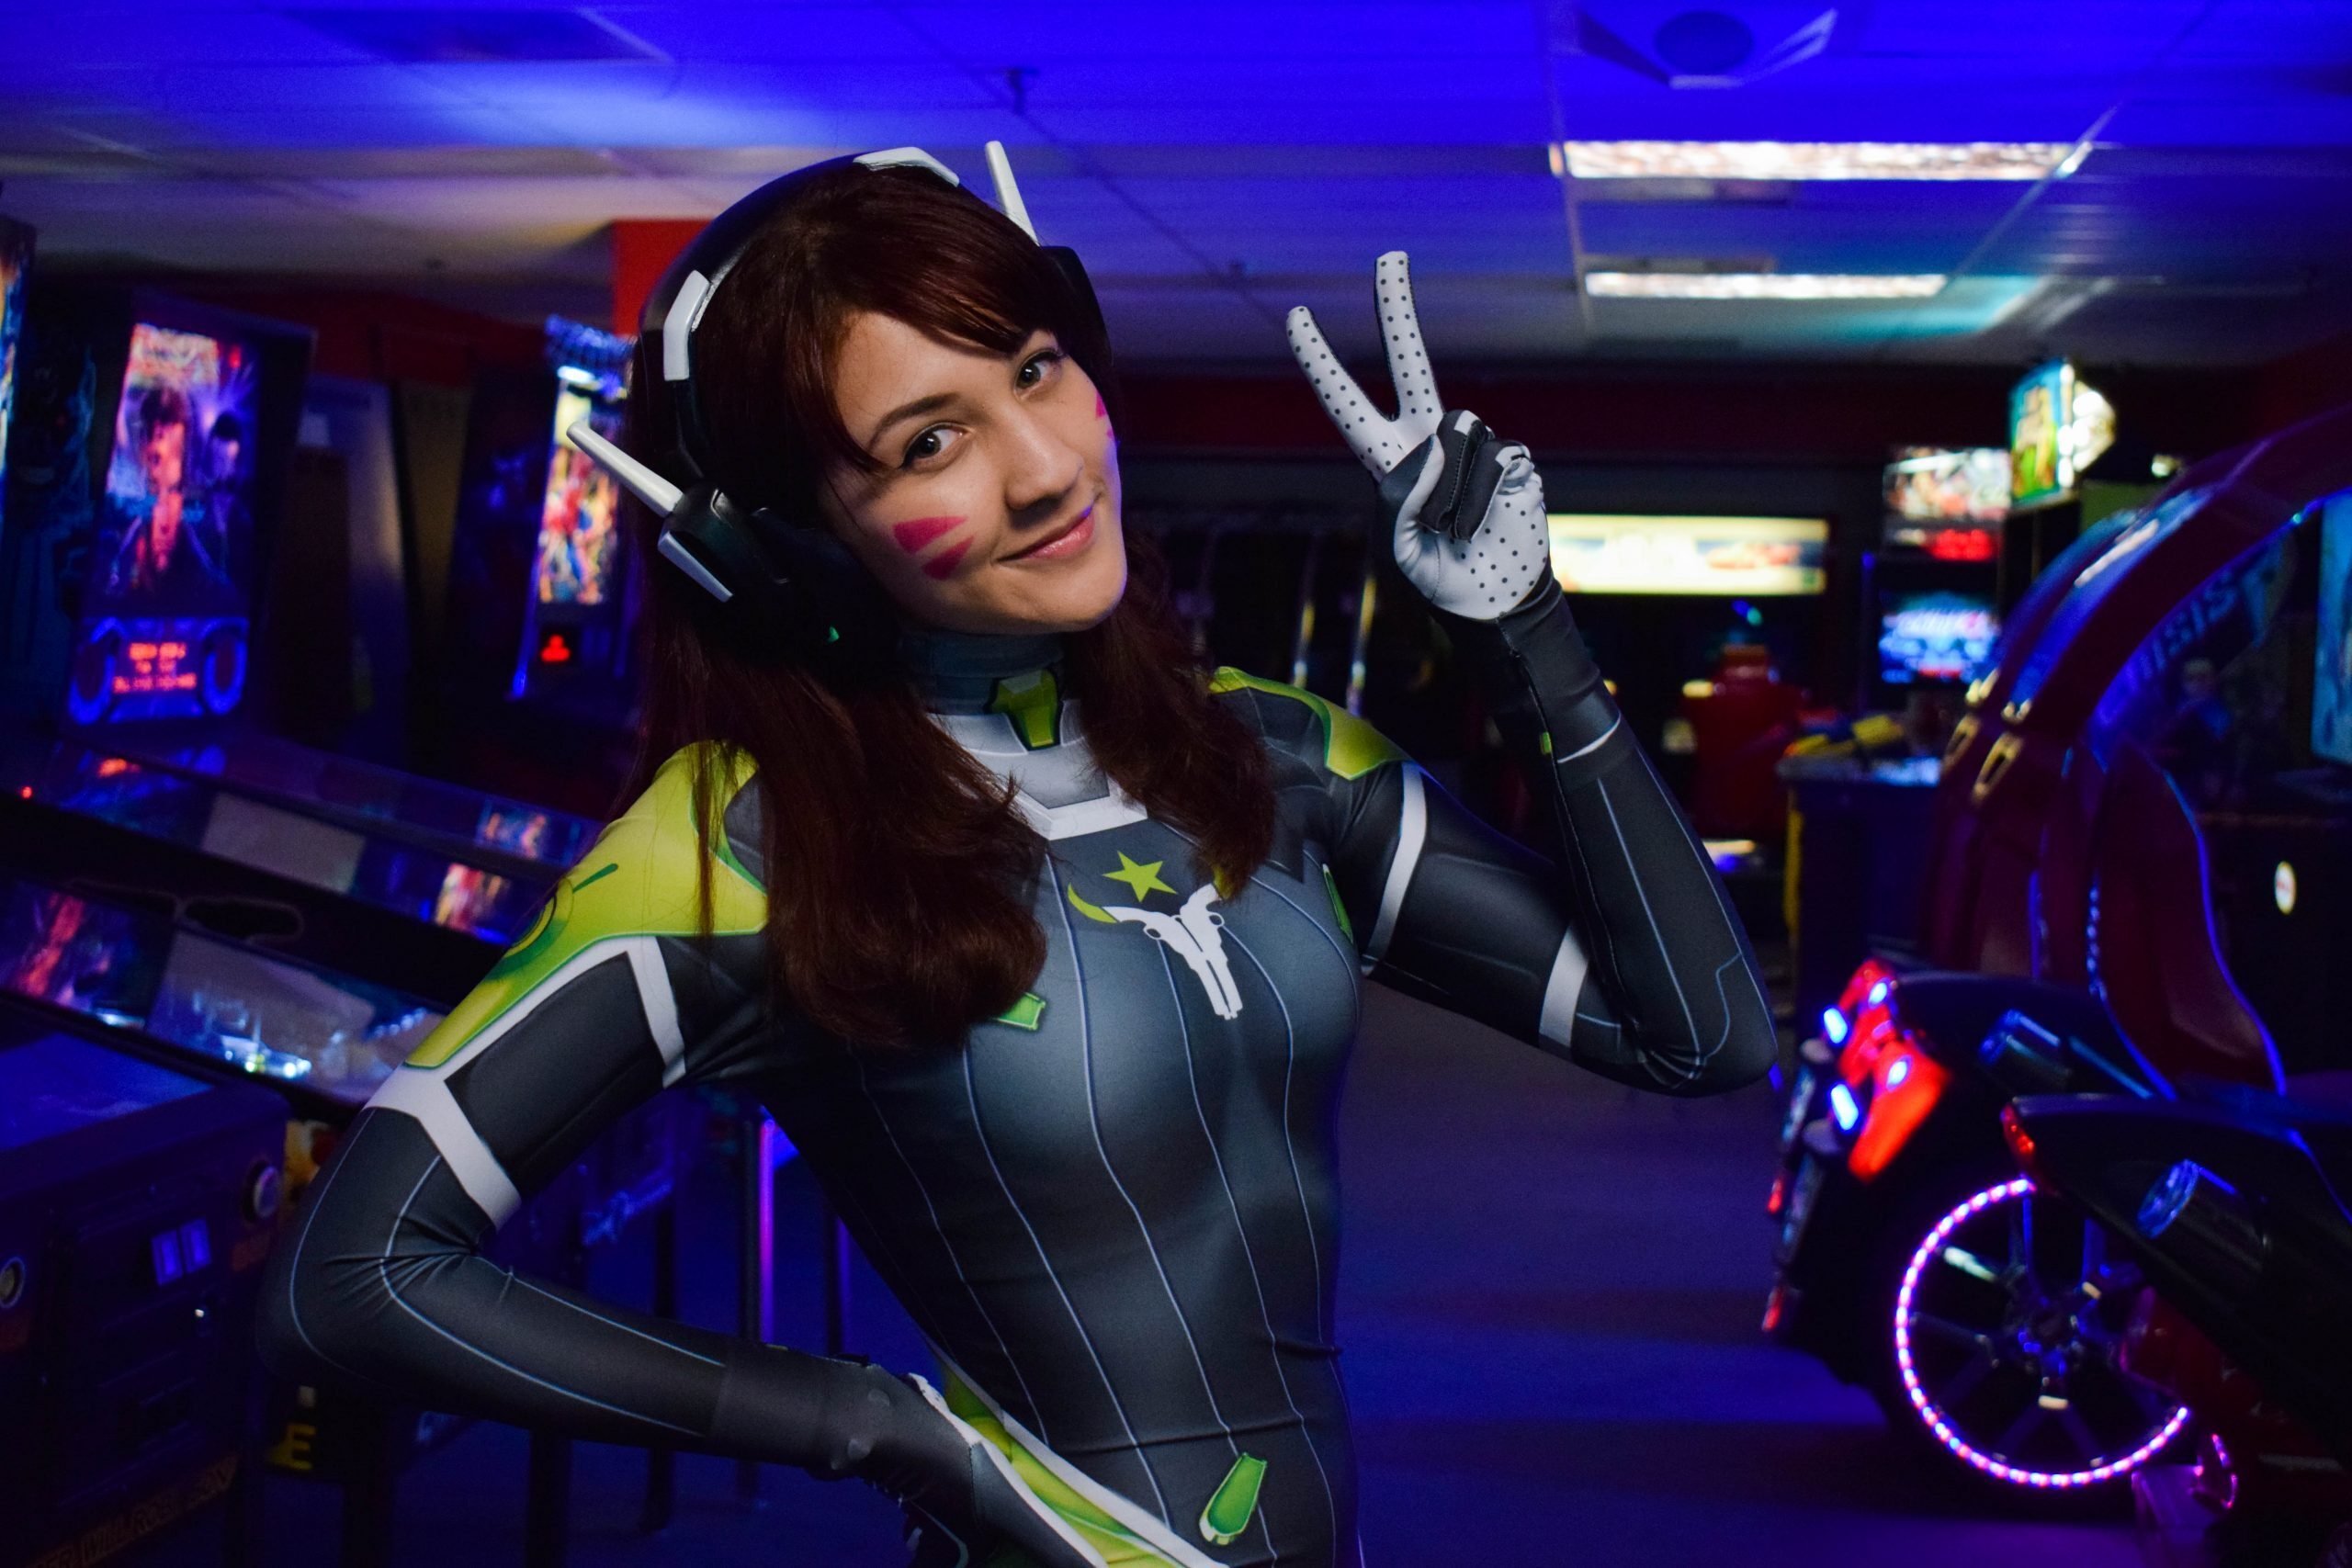 The Houston Outlaws Overwatch team made a first-of-its-kind deal with Jordyn 'LucyInDisguise’ McCoy as their official team cosplayer.